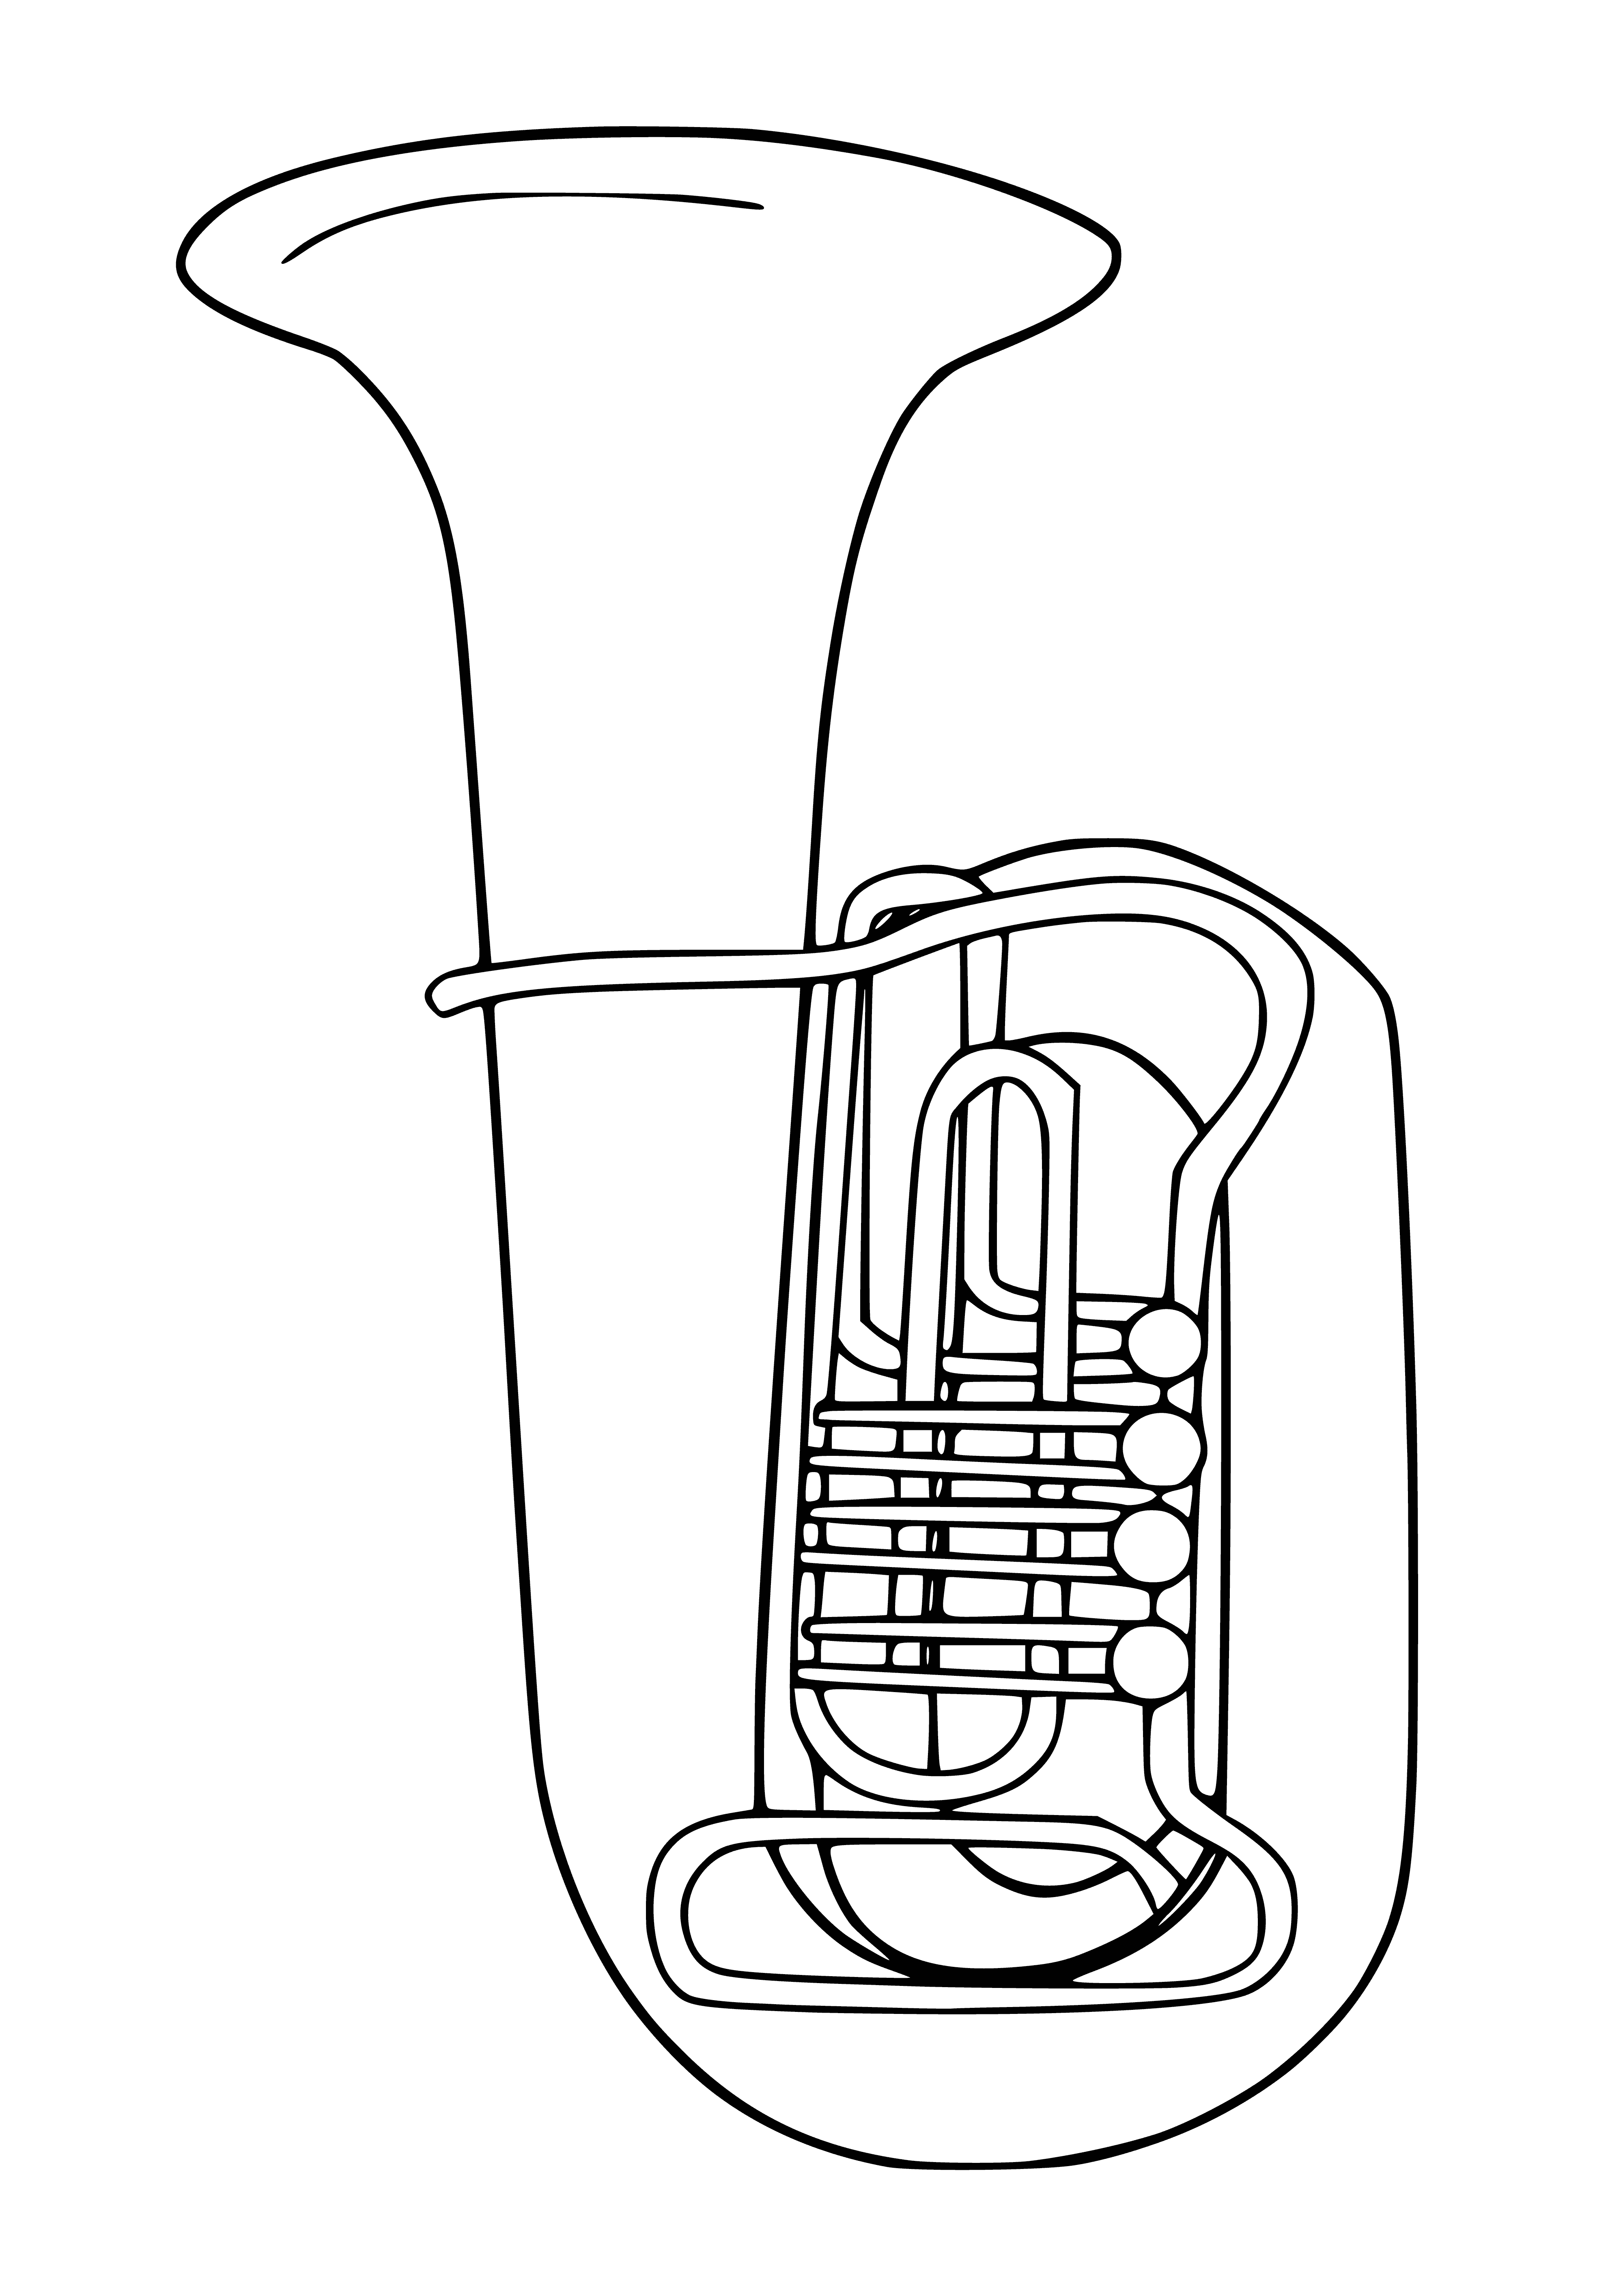 coloring page: A tuba is a deep, rich-sounding, large brass instrument used in orchestras & marching bands. Has long coiled tubing & valves to control pitch.